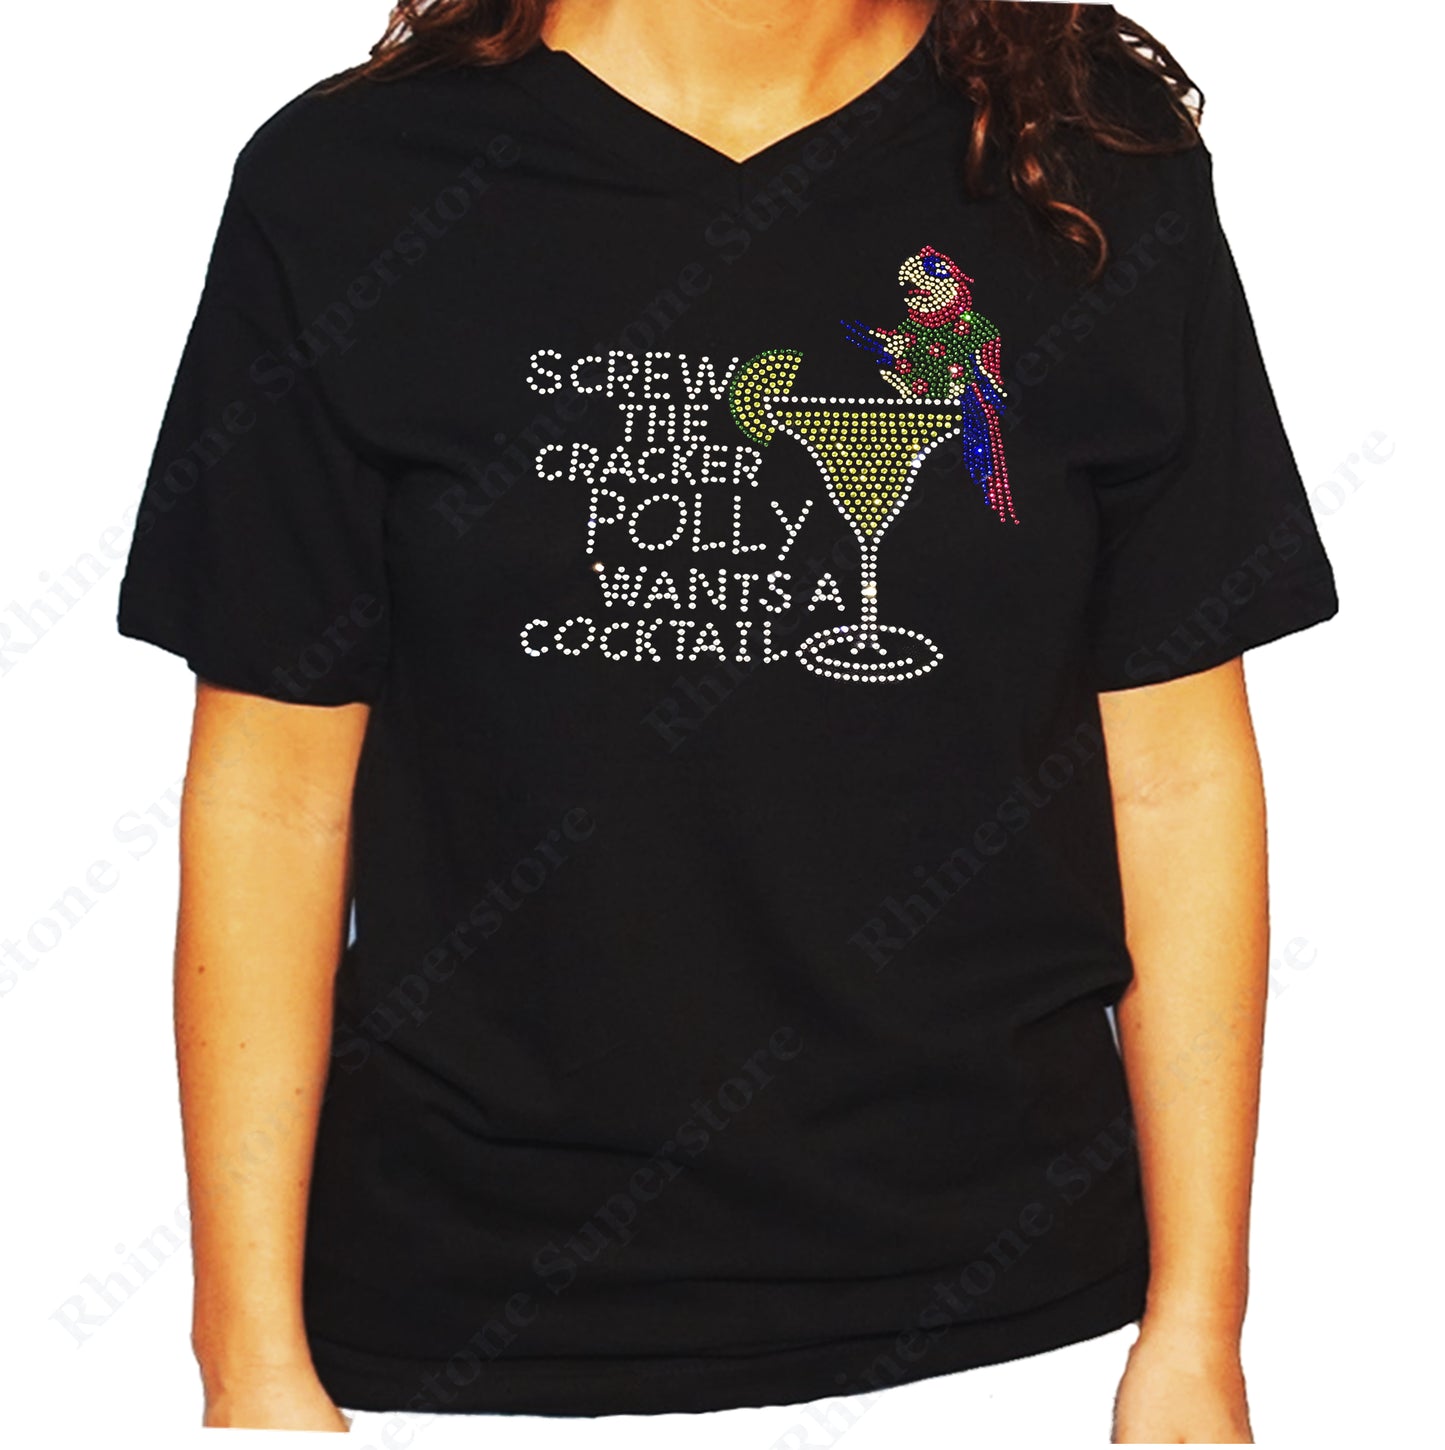 Women's / Unisex T-Shirt with Poly want a Cocktail in Rhinestones